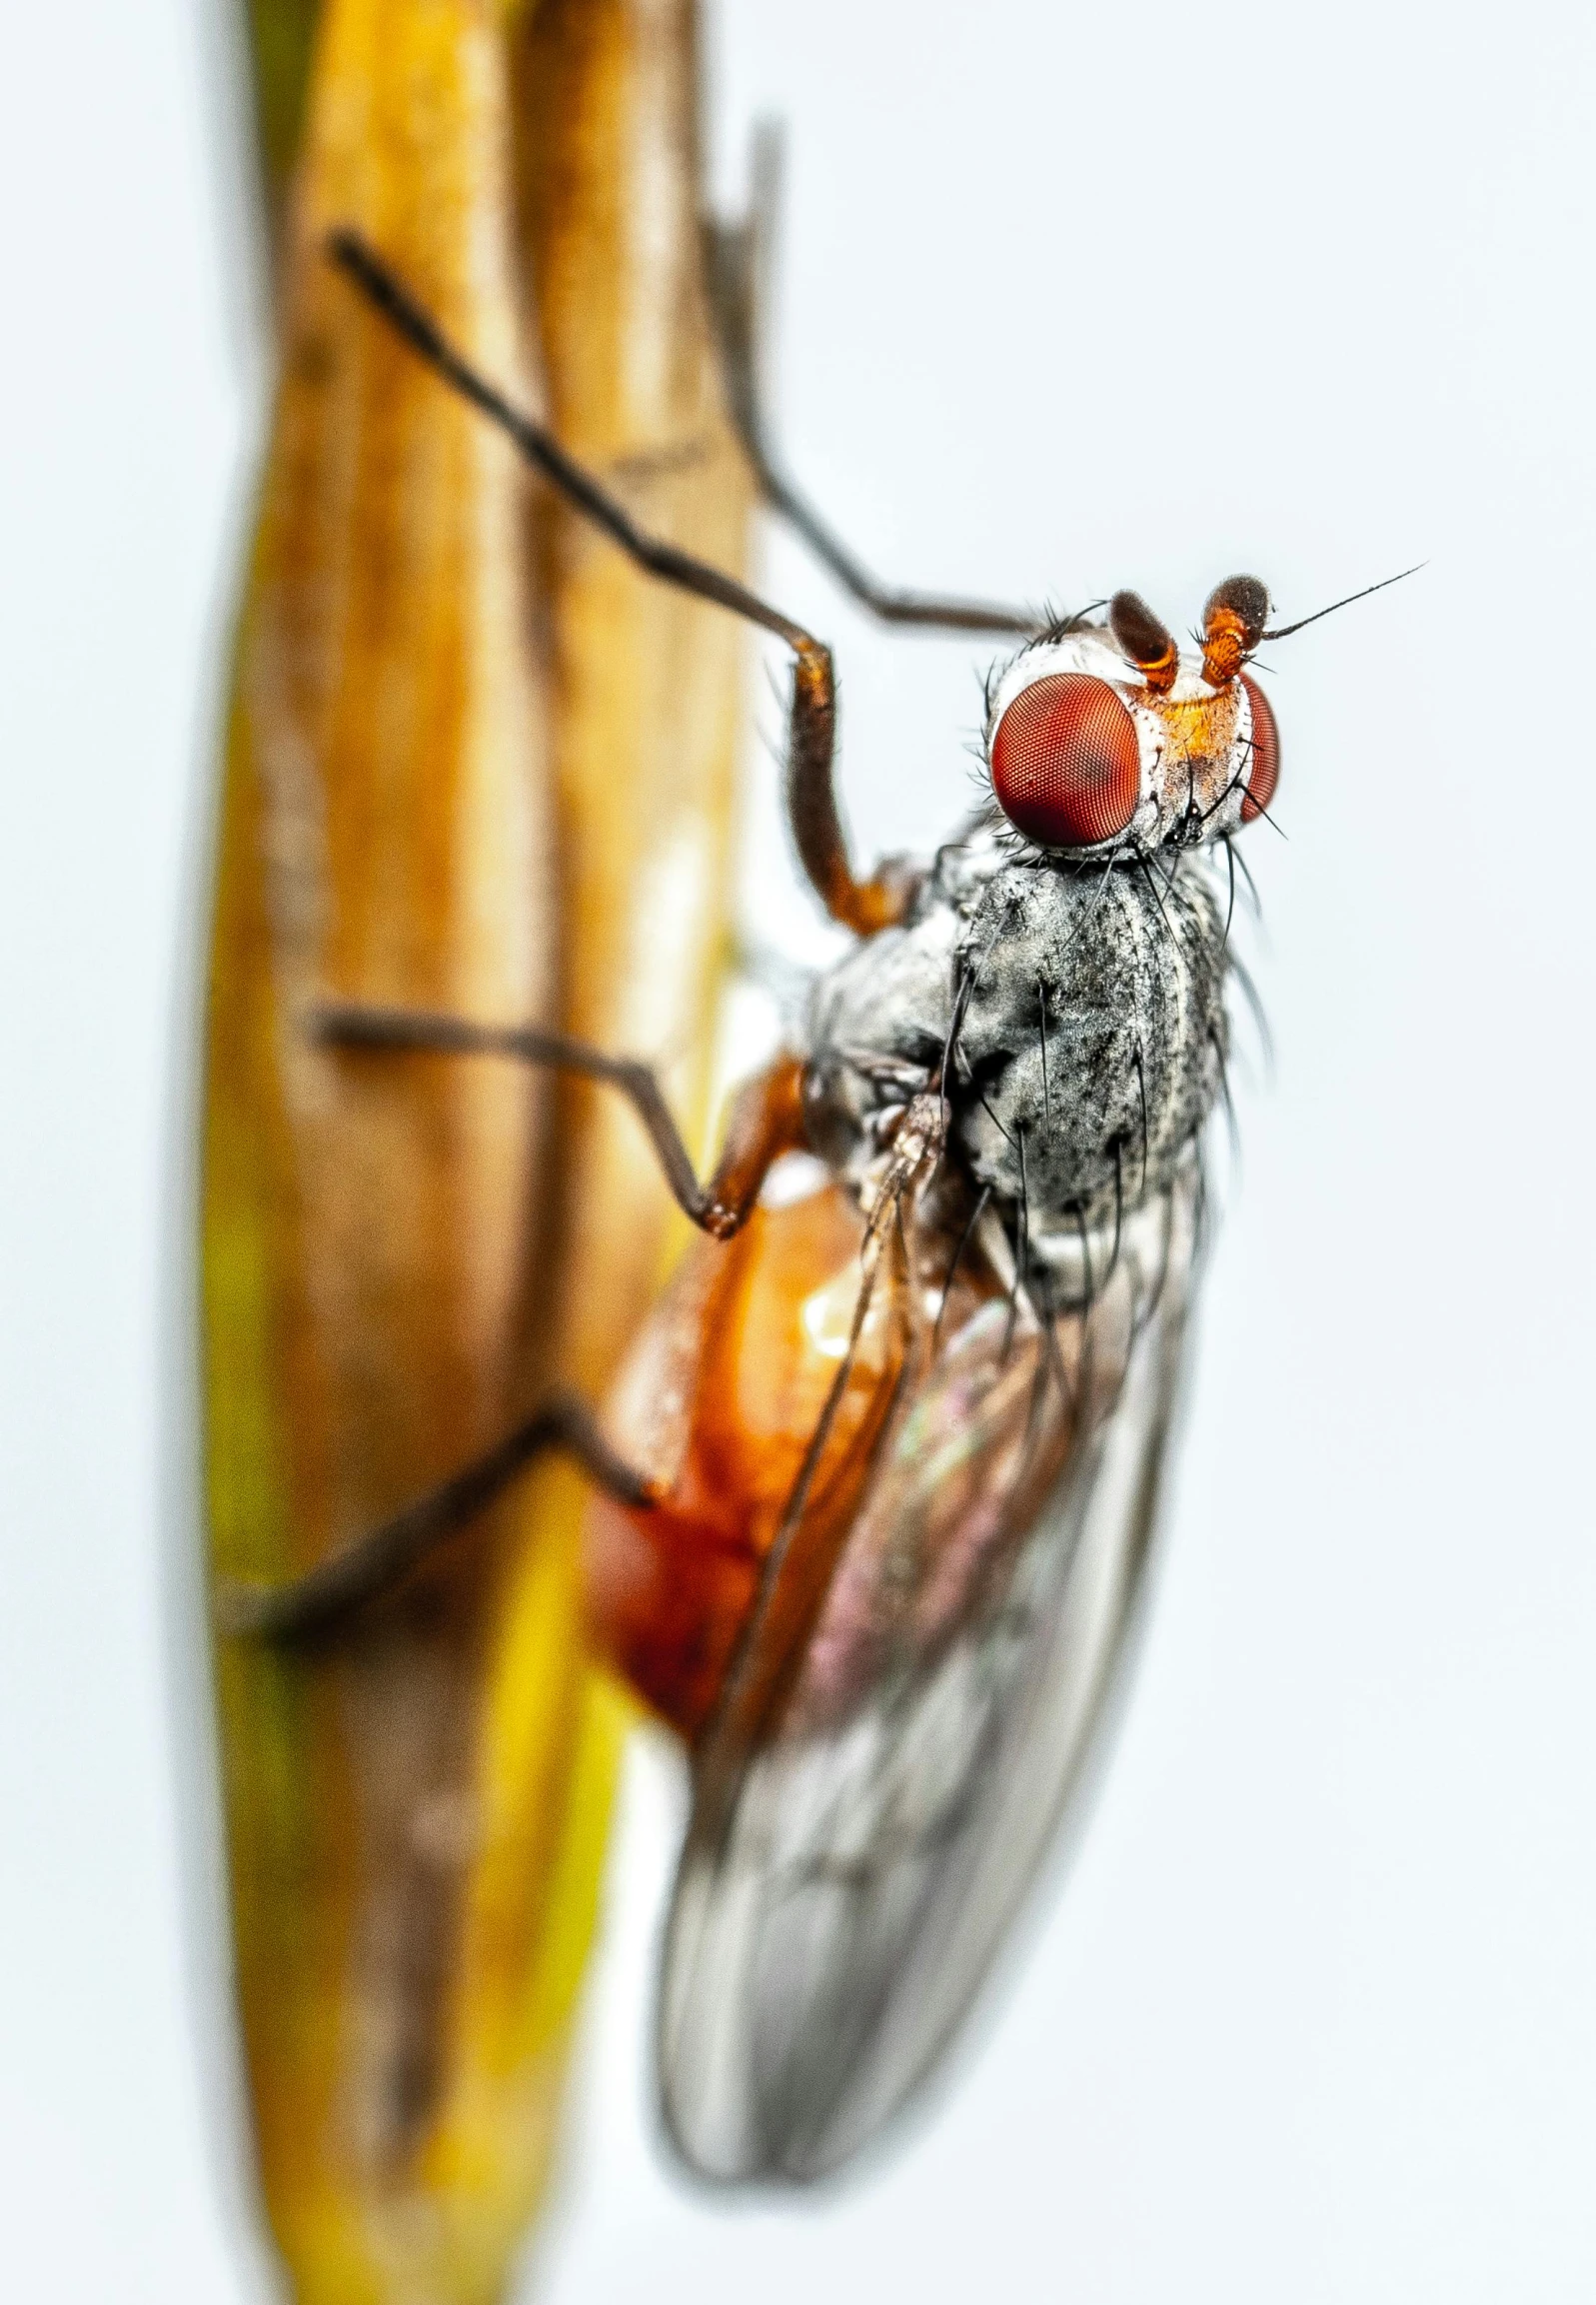 a close - up po of a fly eating another type of insect